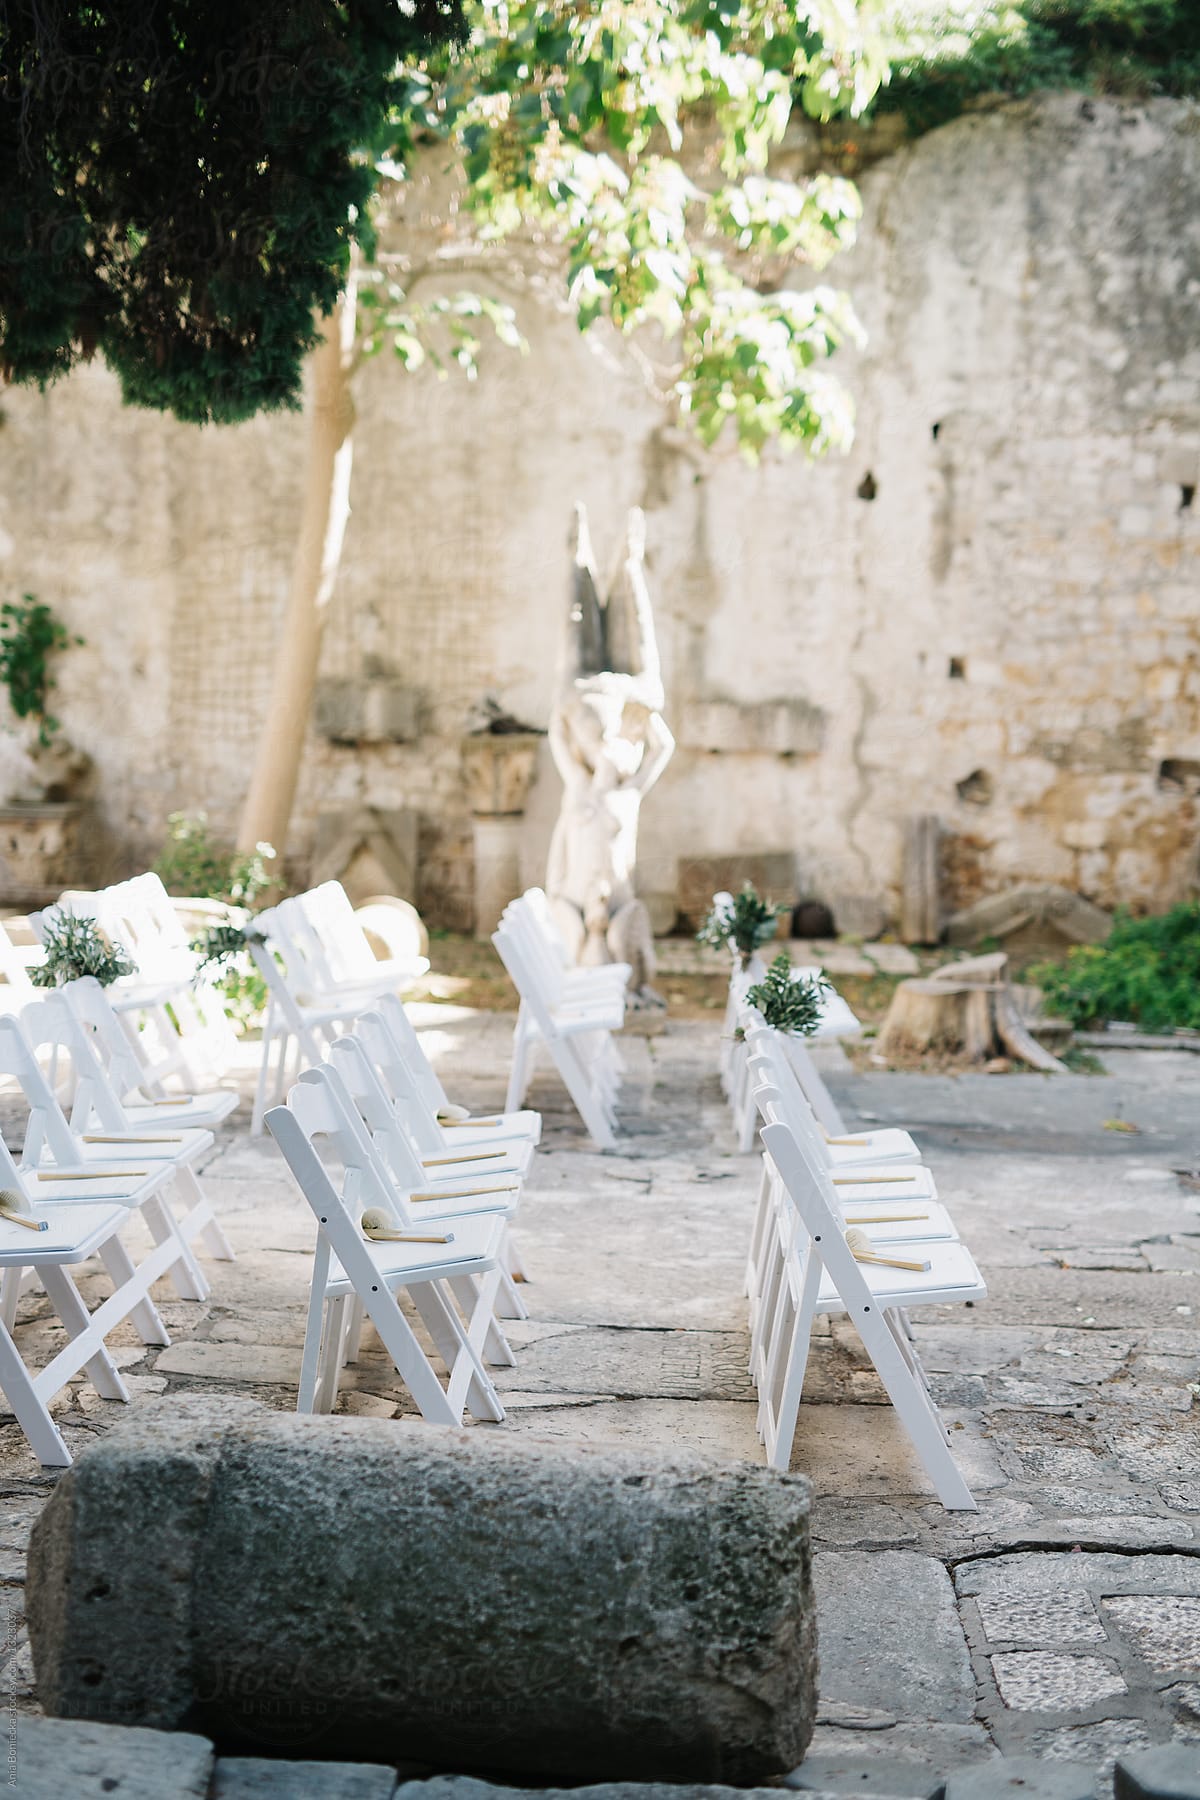 Chairs set out for a wedding